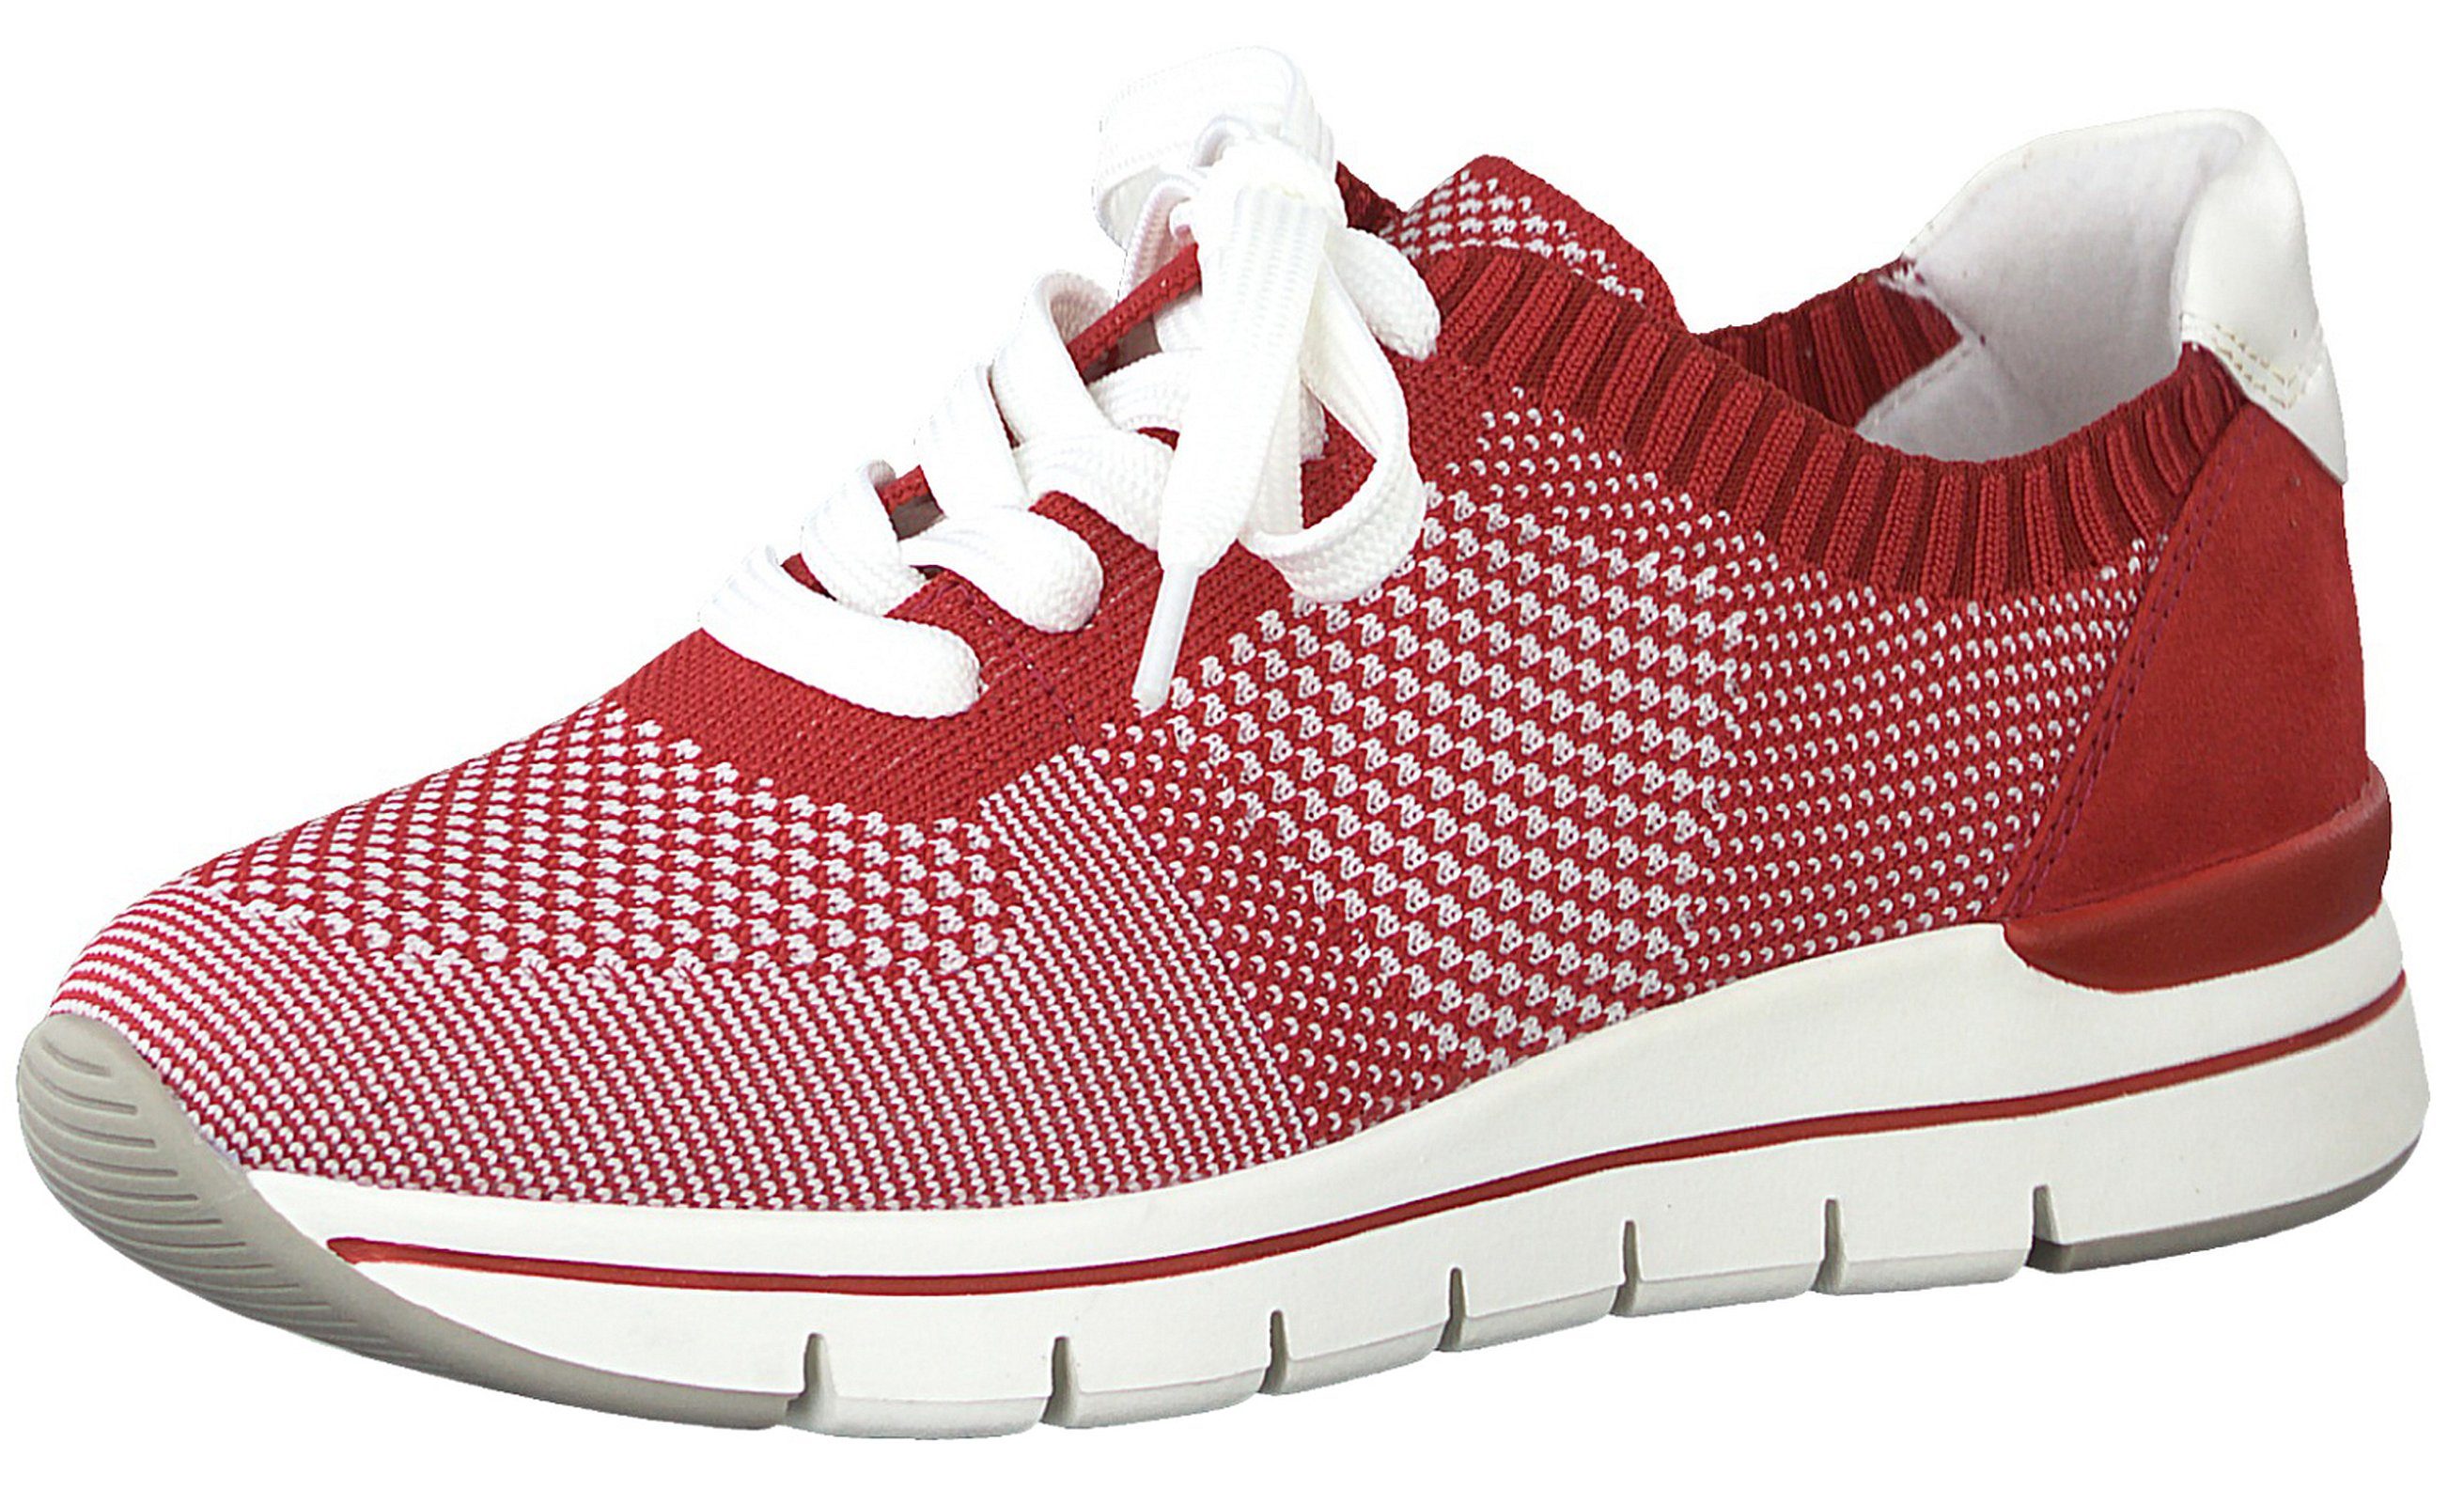 MARCO TOZZI 2-2-23785-24 597 Red Comb Sneaker